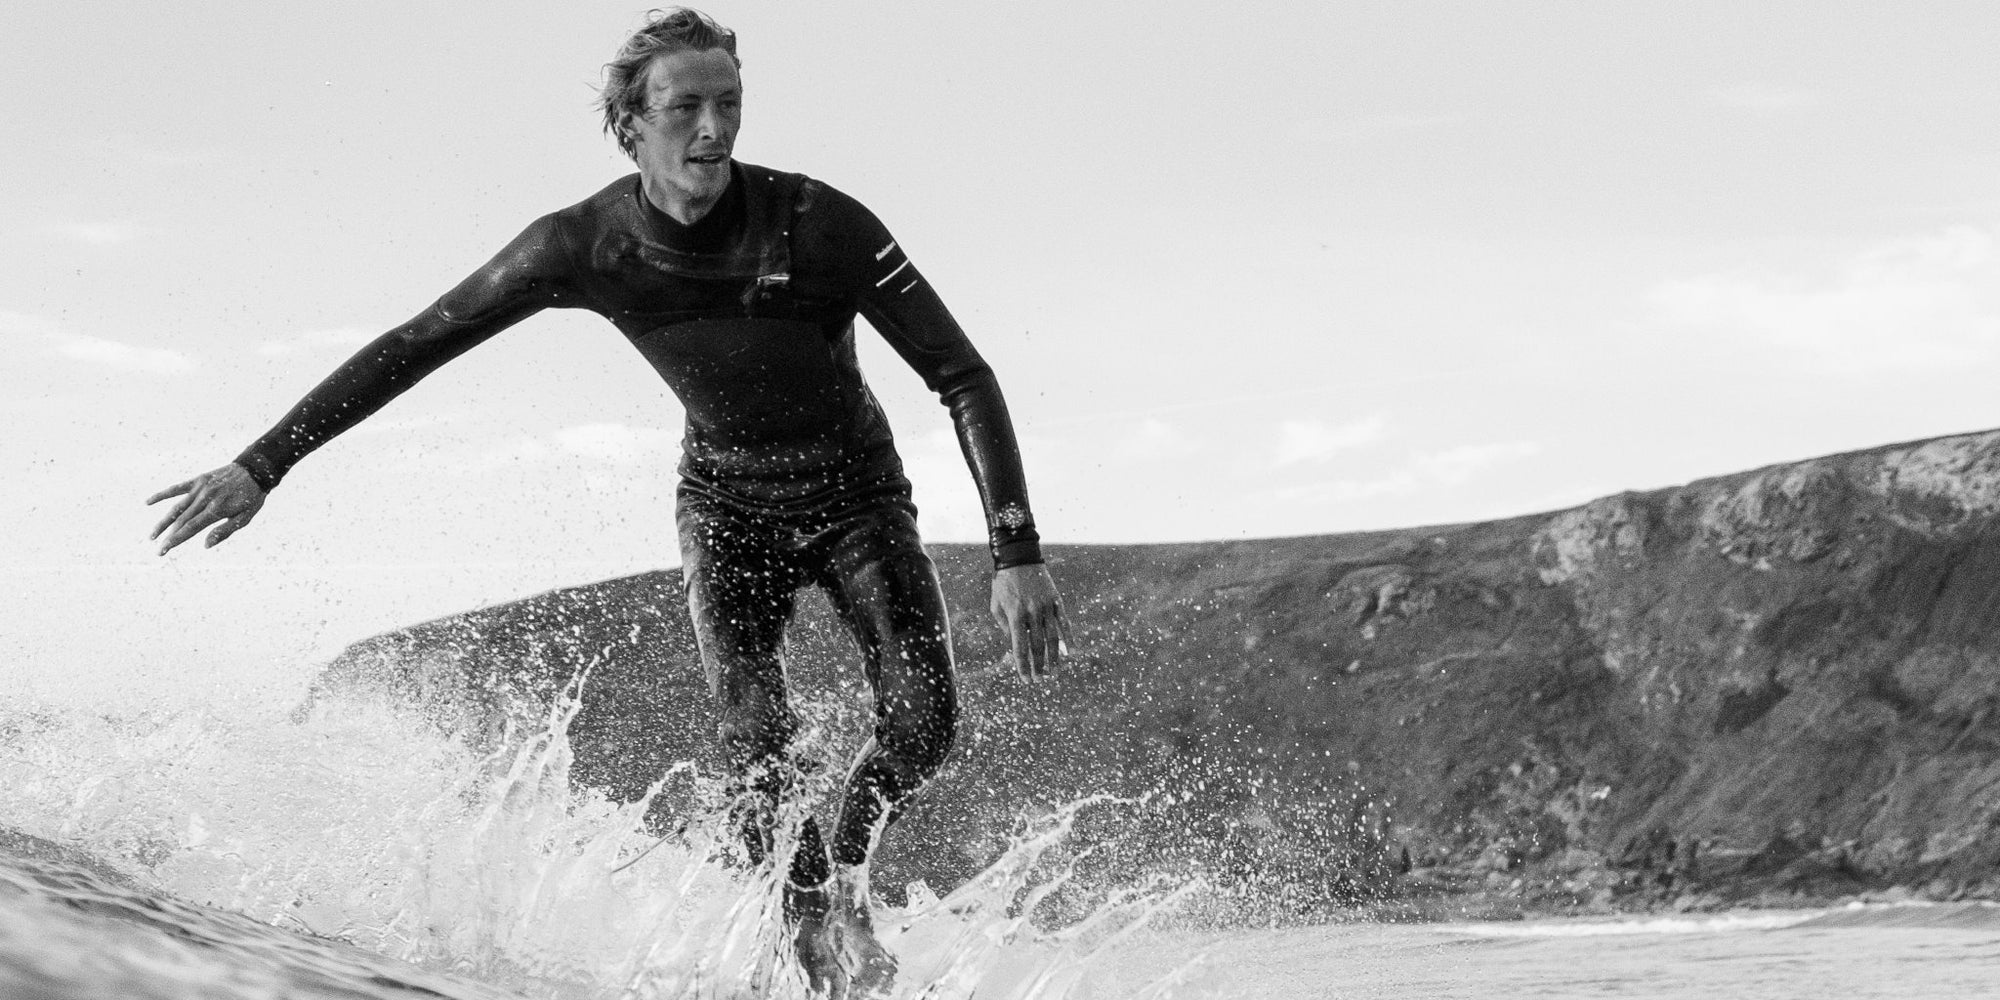 Black and White Image of a Surfer In Cornwall